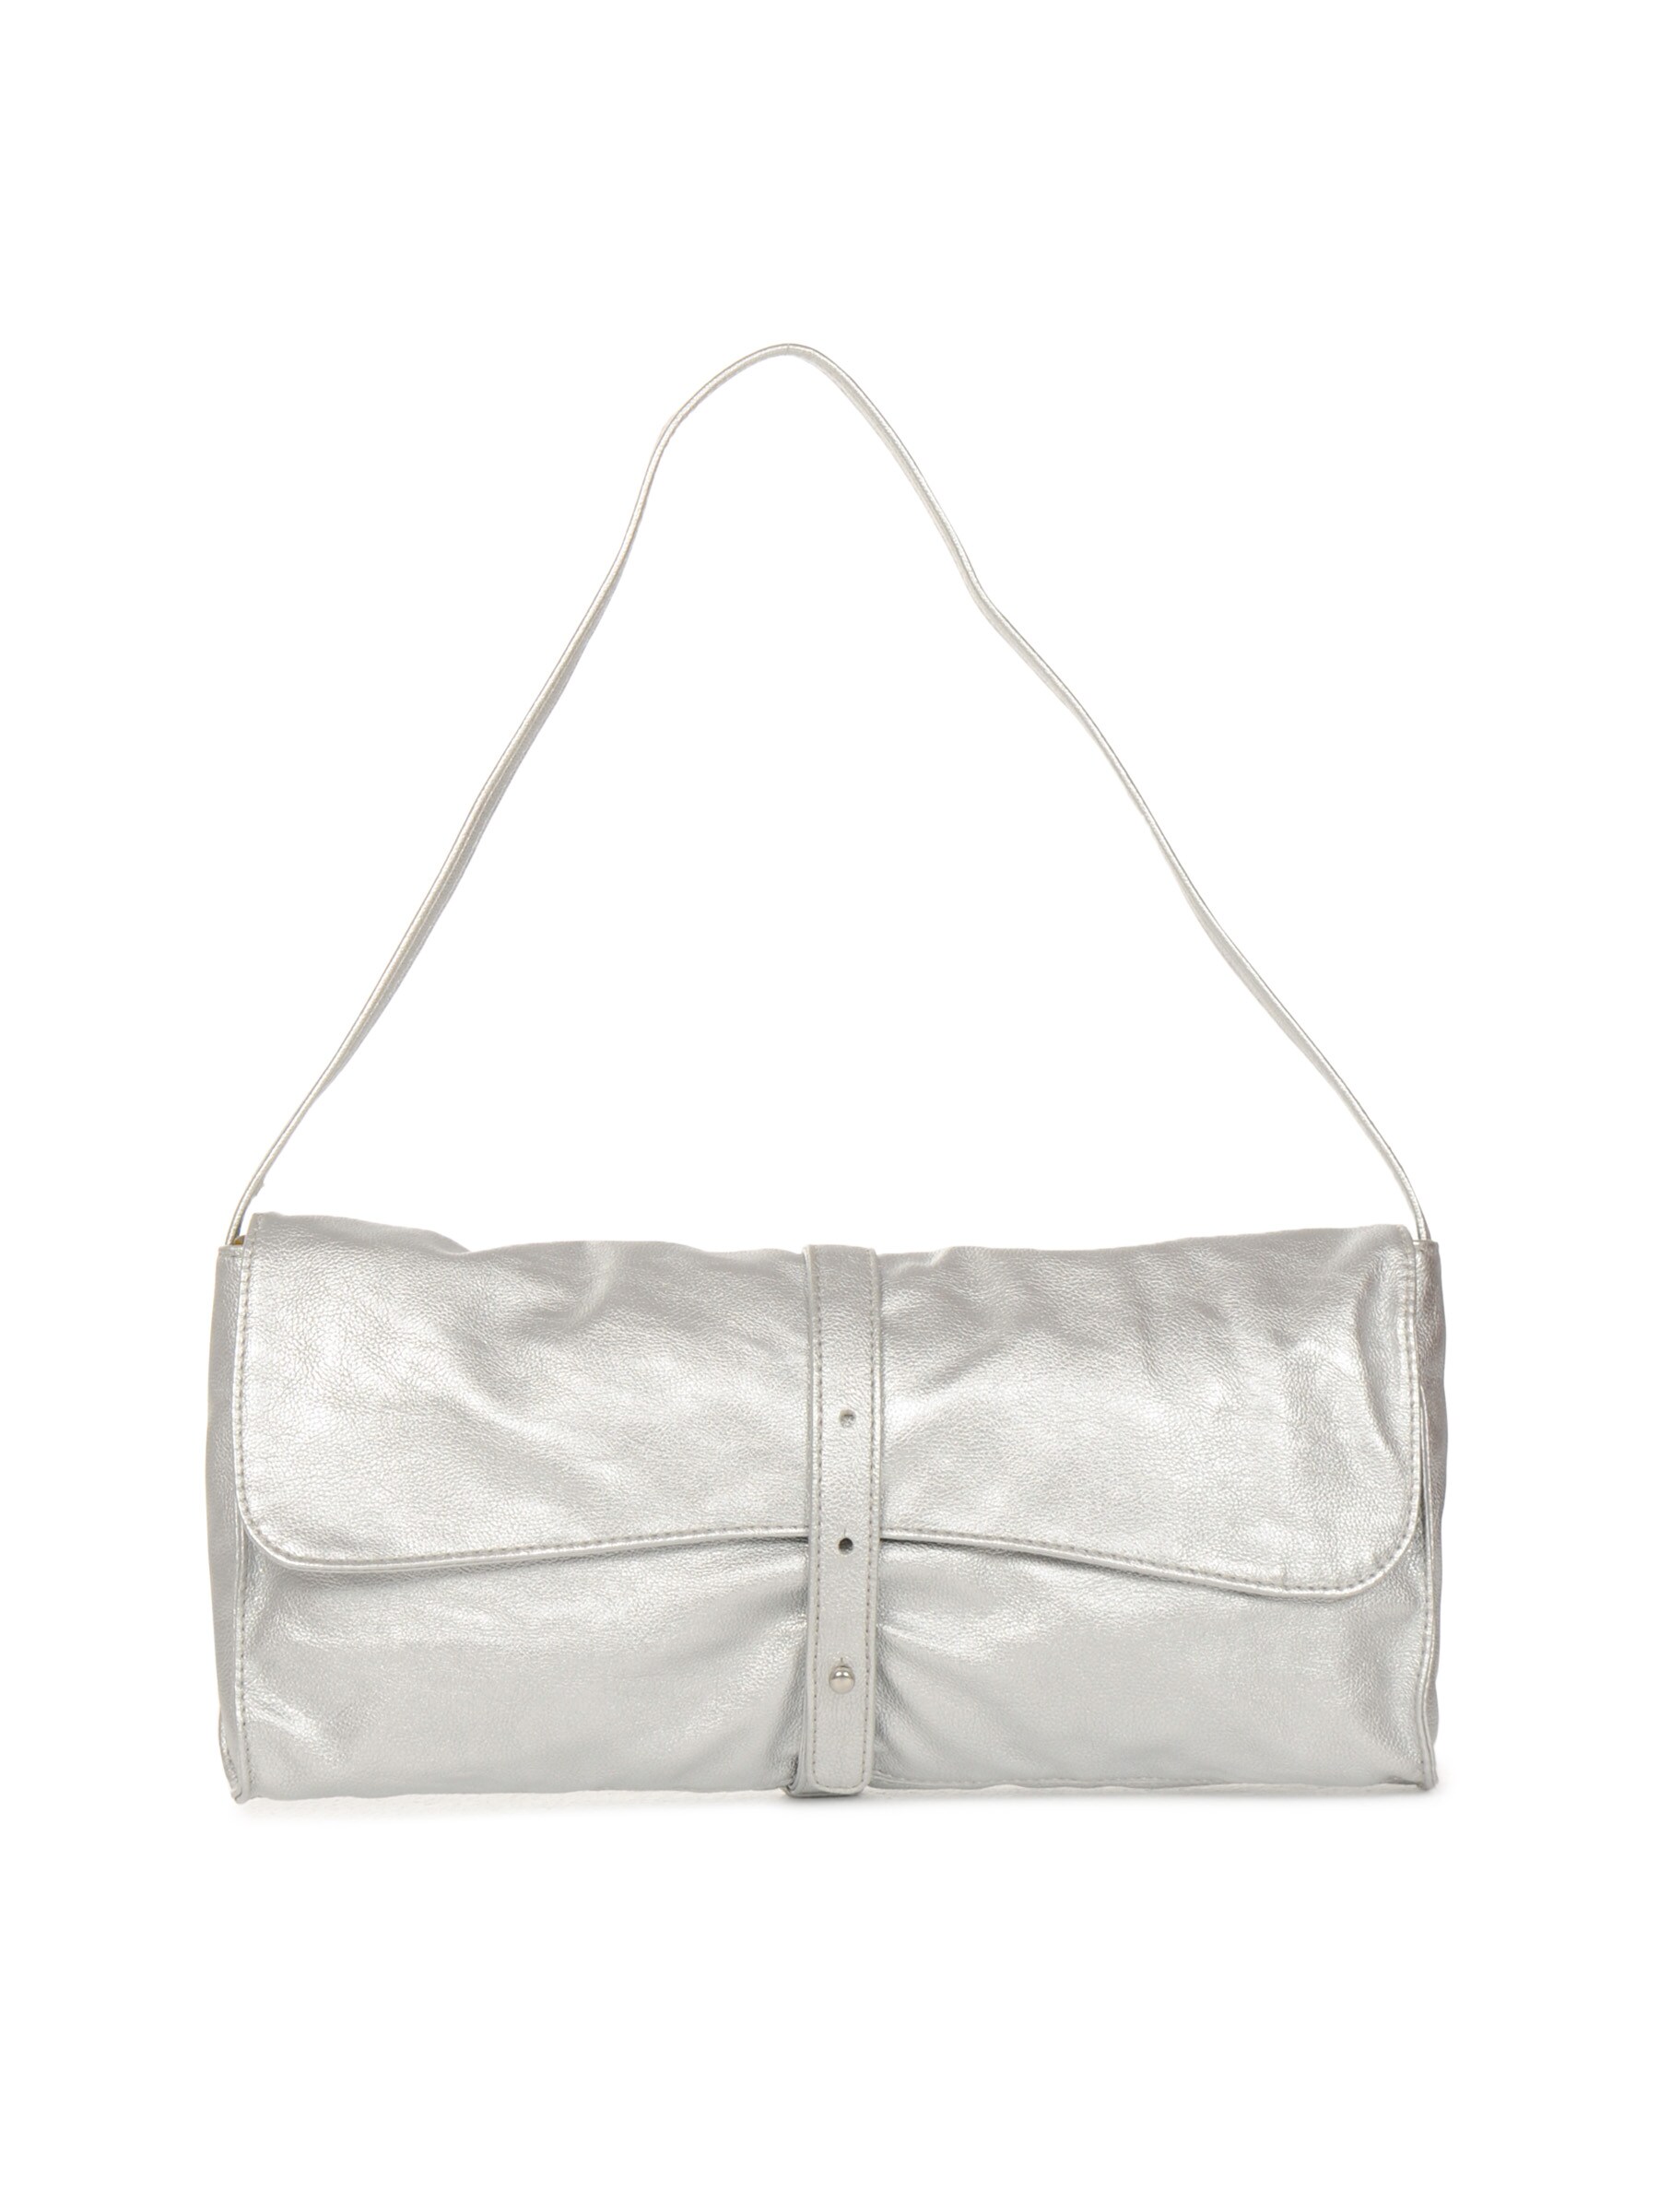 United Colors of Benetton Women Solid Silver Handbags